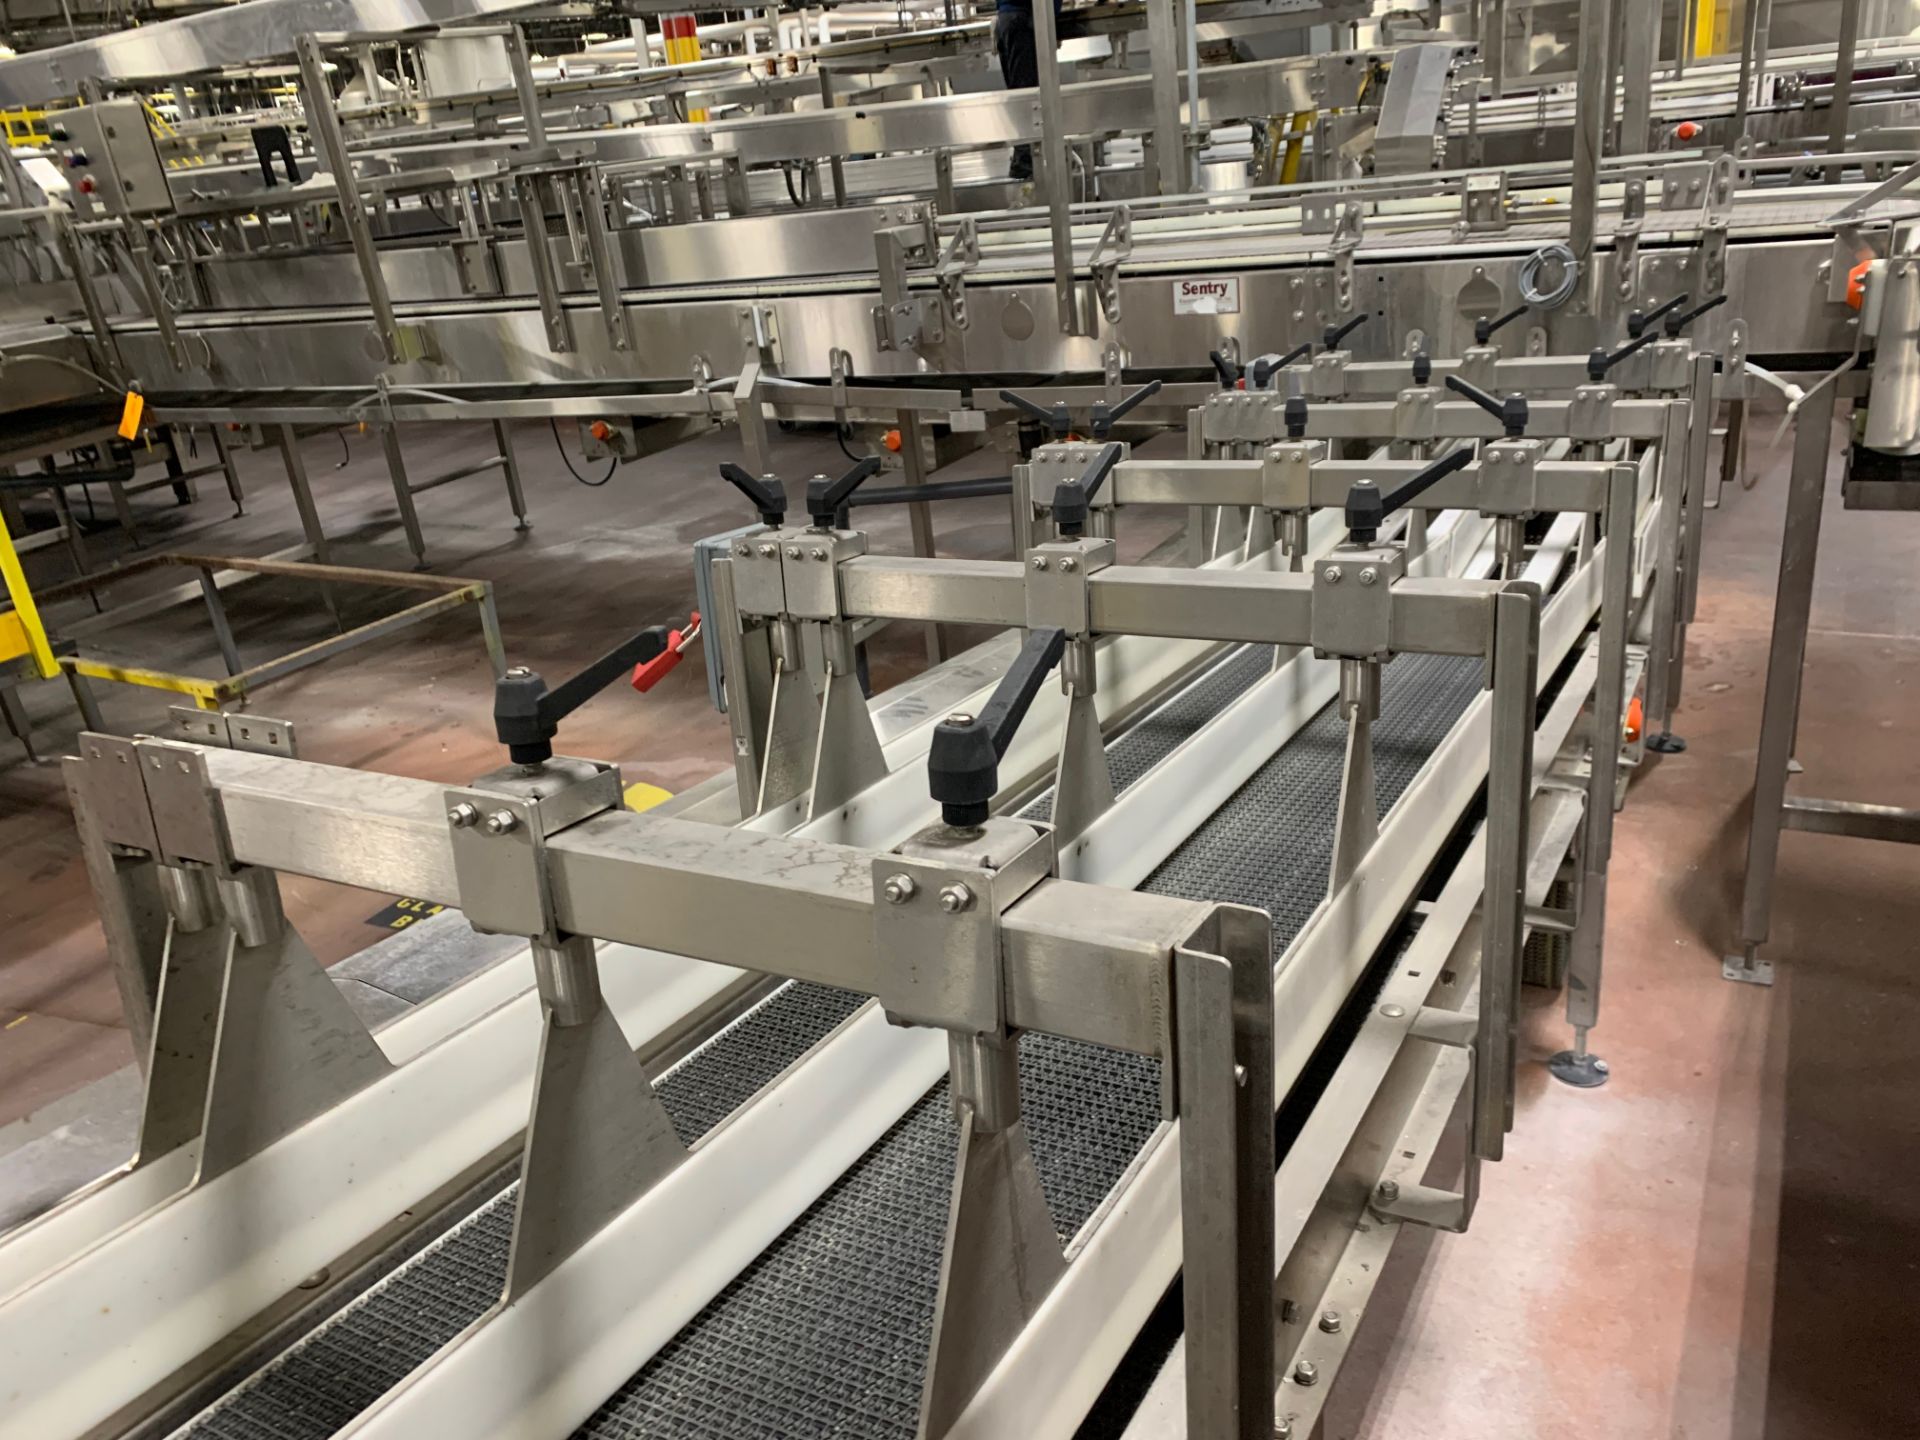 Sentry Carton Conveyor from Divider Switch to Krones Traypacker - Image 11 of 17